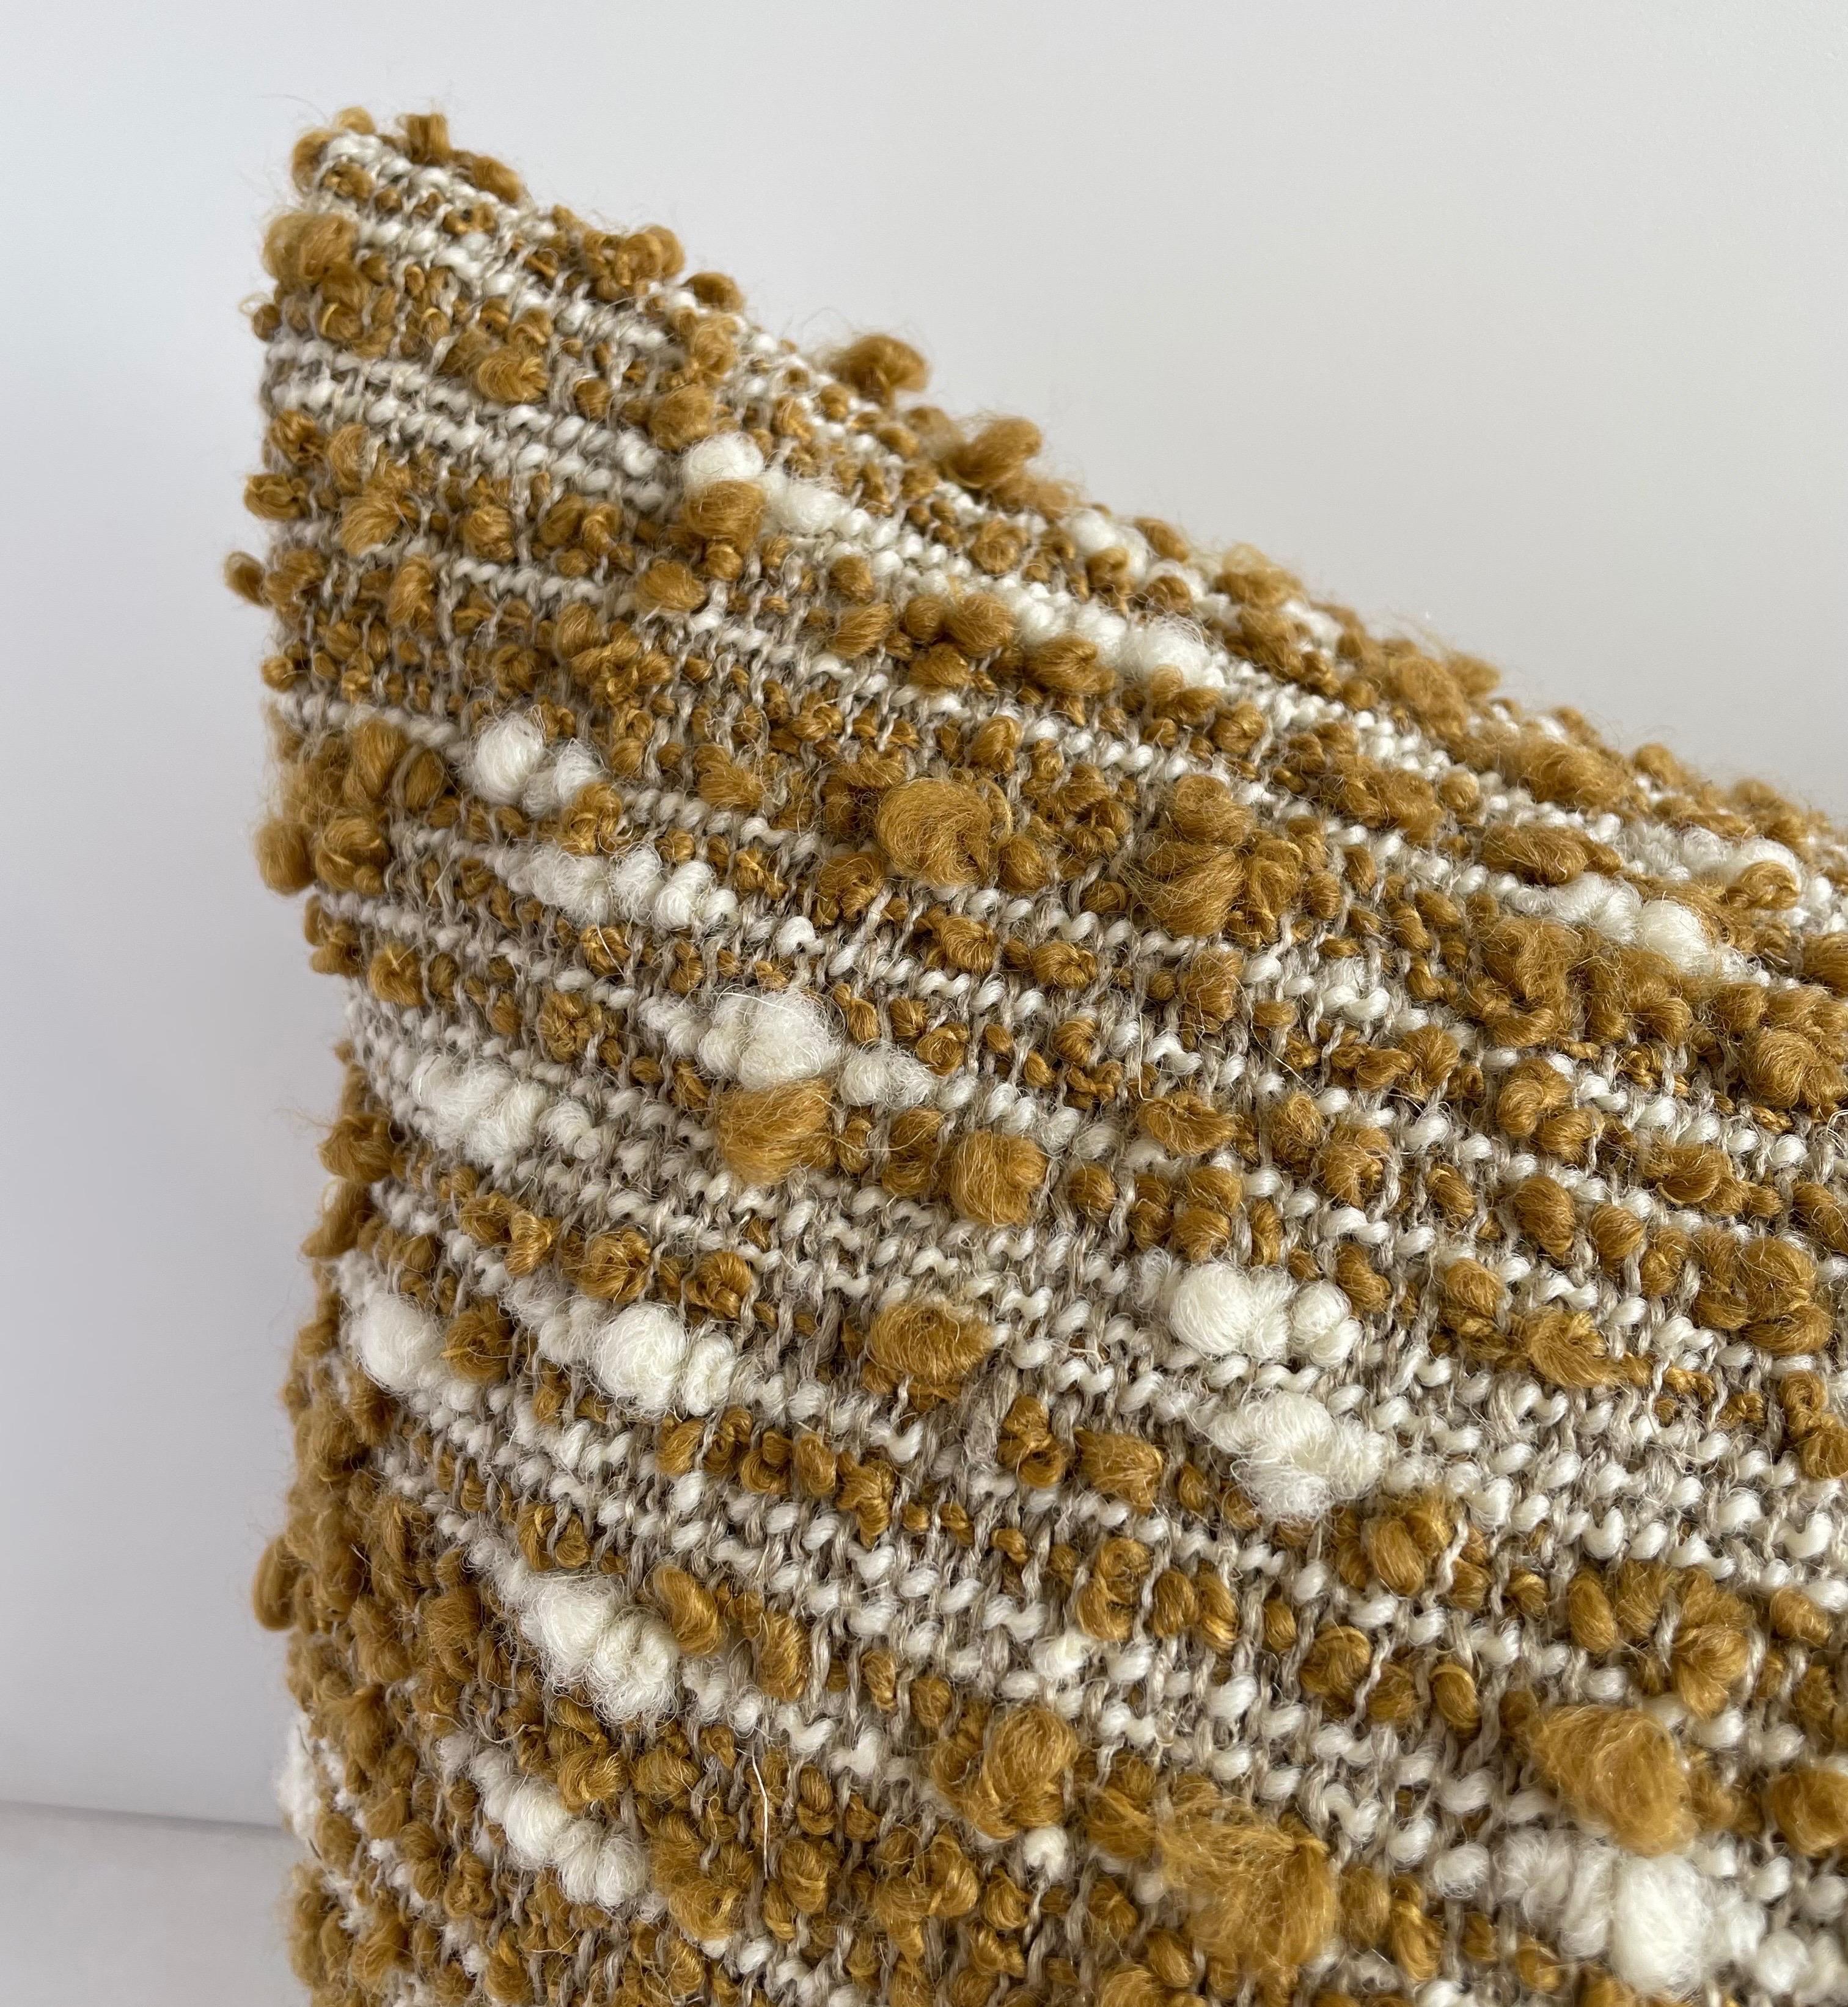 Woven in Belgium using traditional weaving techniques, Bloom Home Kim is a medium weight throw that features a soft boucle yarn on linen warp. Includes insert. 
 
Color: Natural and Mustard 
Content: Linen 33%. Wool 28%. Acrylic 28%. Polyester 8%.